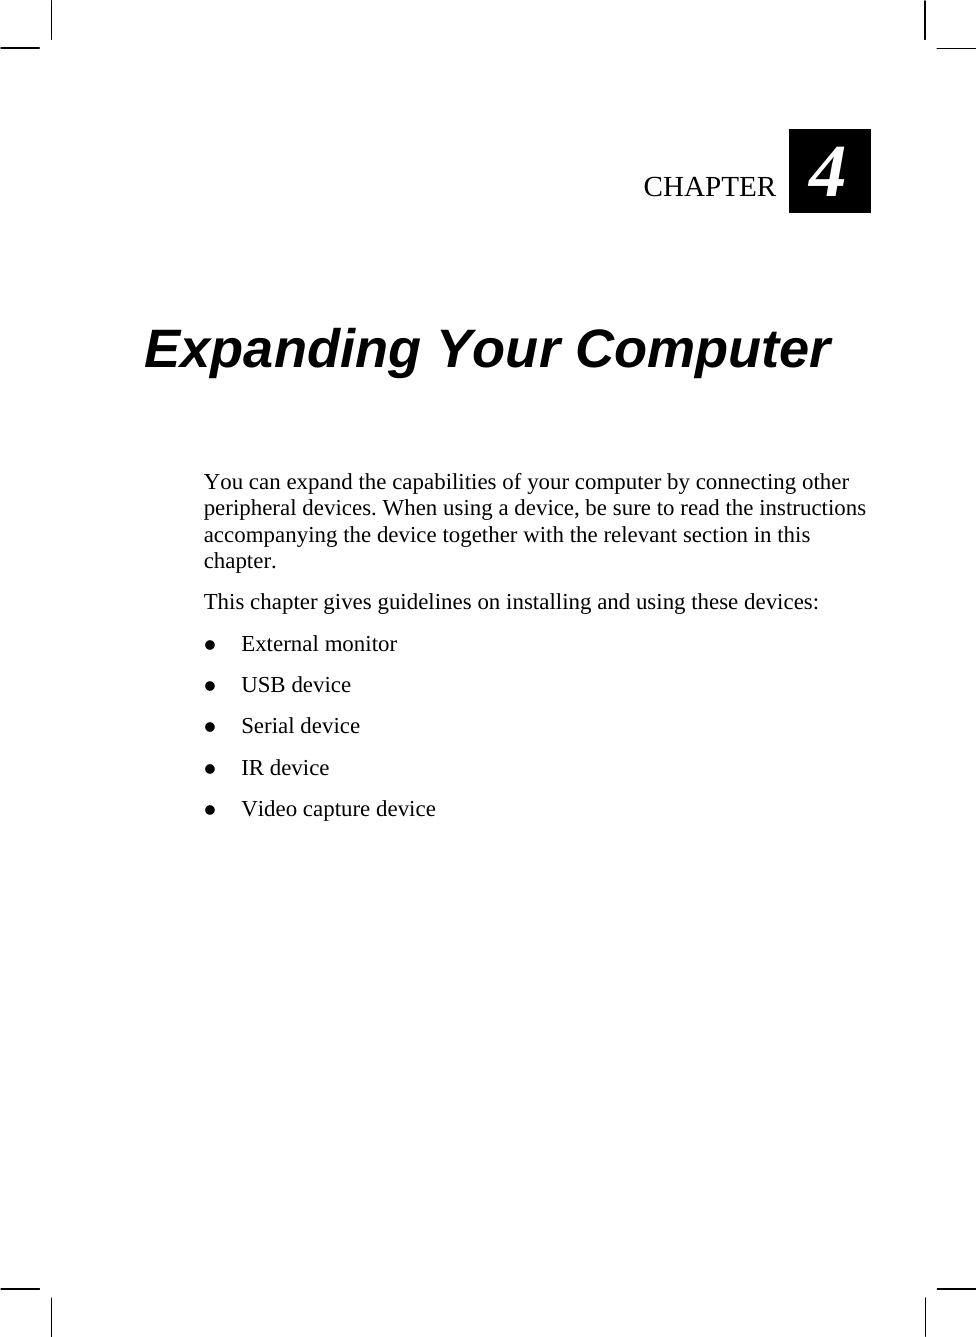  4CHAPTER   Expanding Your Computer You can expand the capabilities of your computer by connecting other peripheral devices. When using a device, be sure to read the instructions accompanying the device together with the relevant section in this chapter. This chapter gives guidelines on installing and using these devices: z External monitor z USB device z Serial device z IR device z Video capture device   